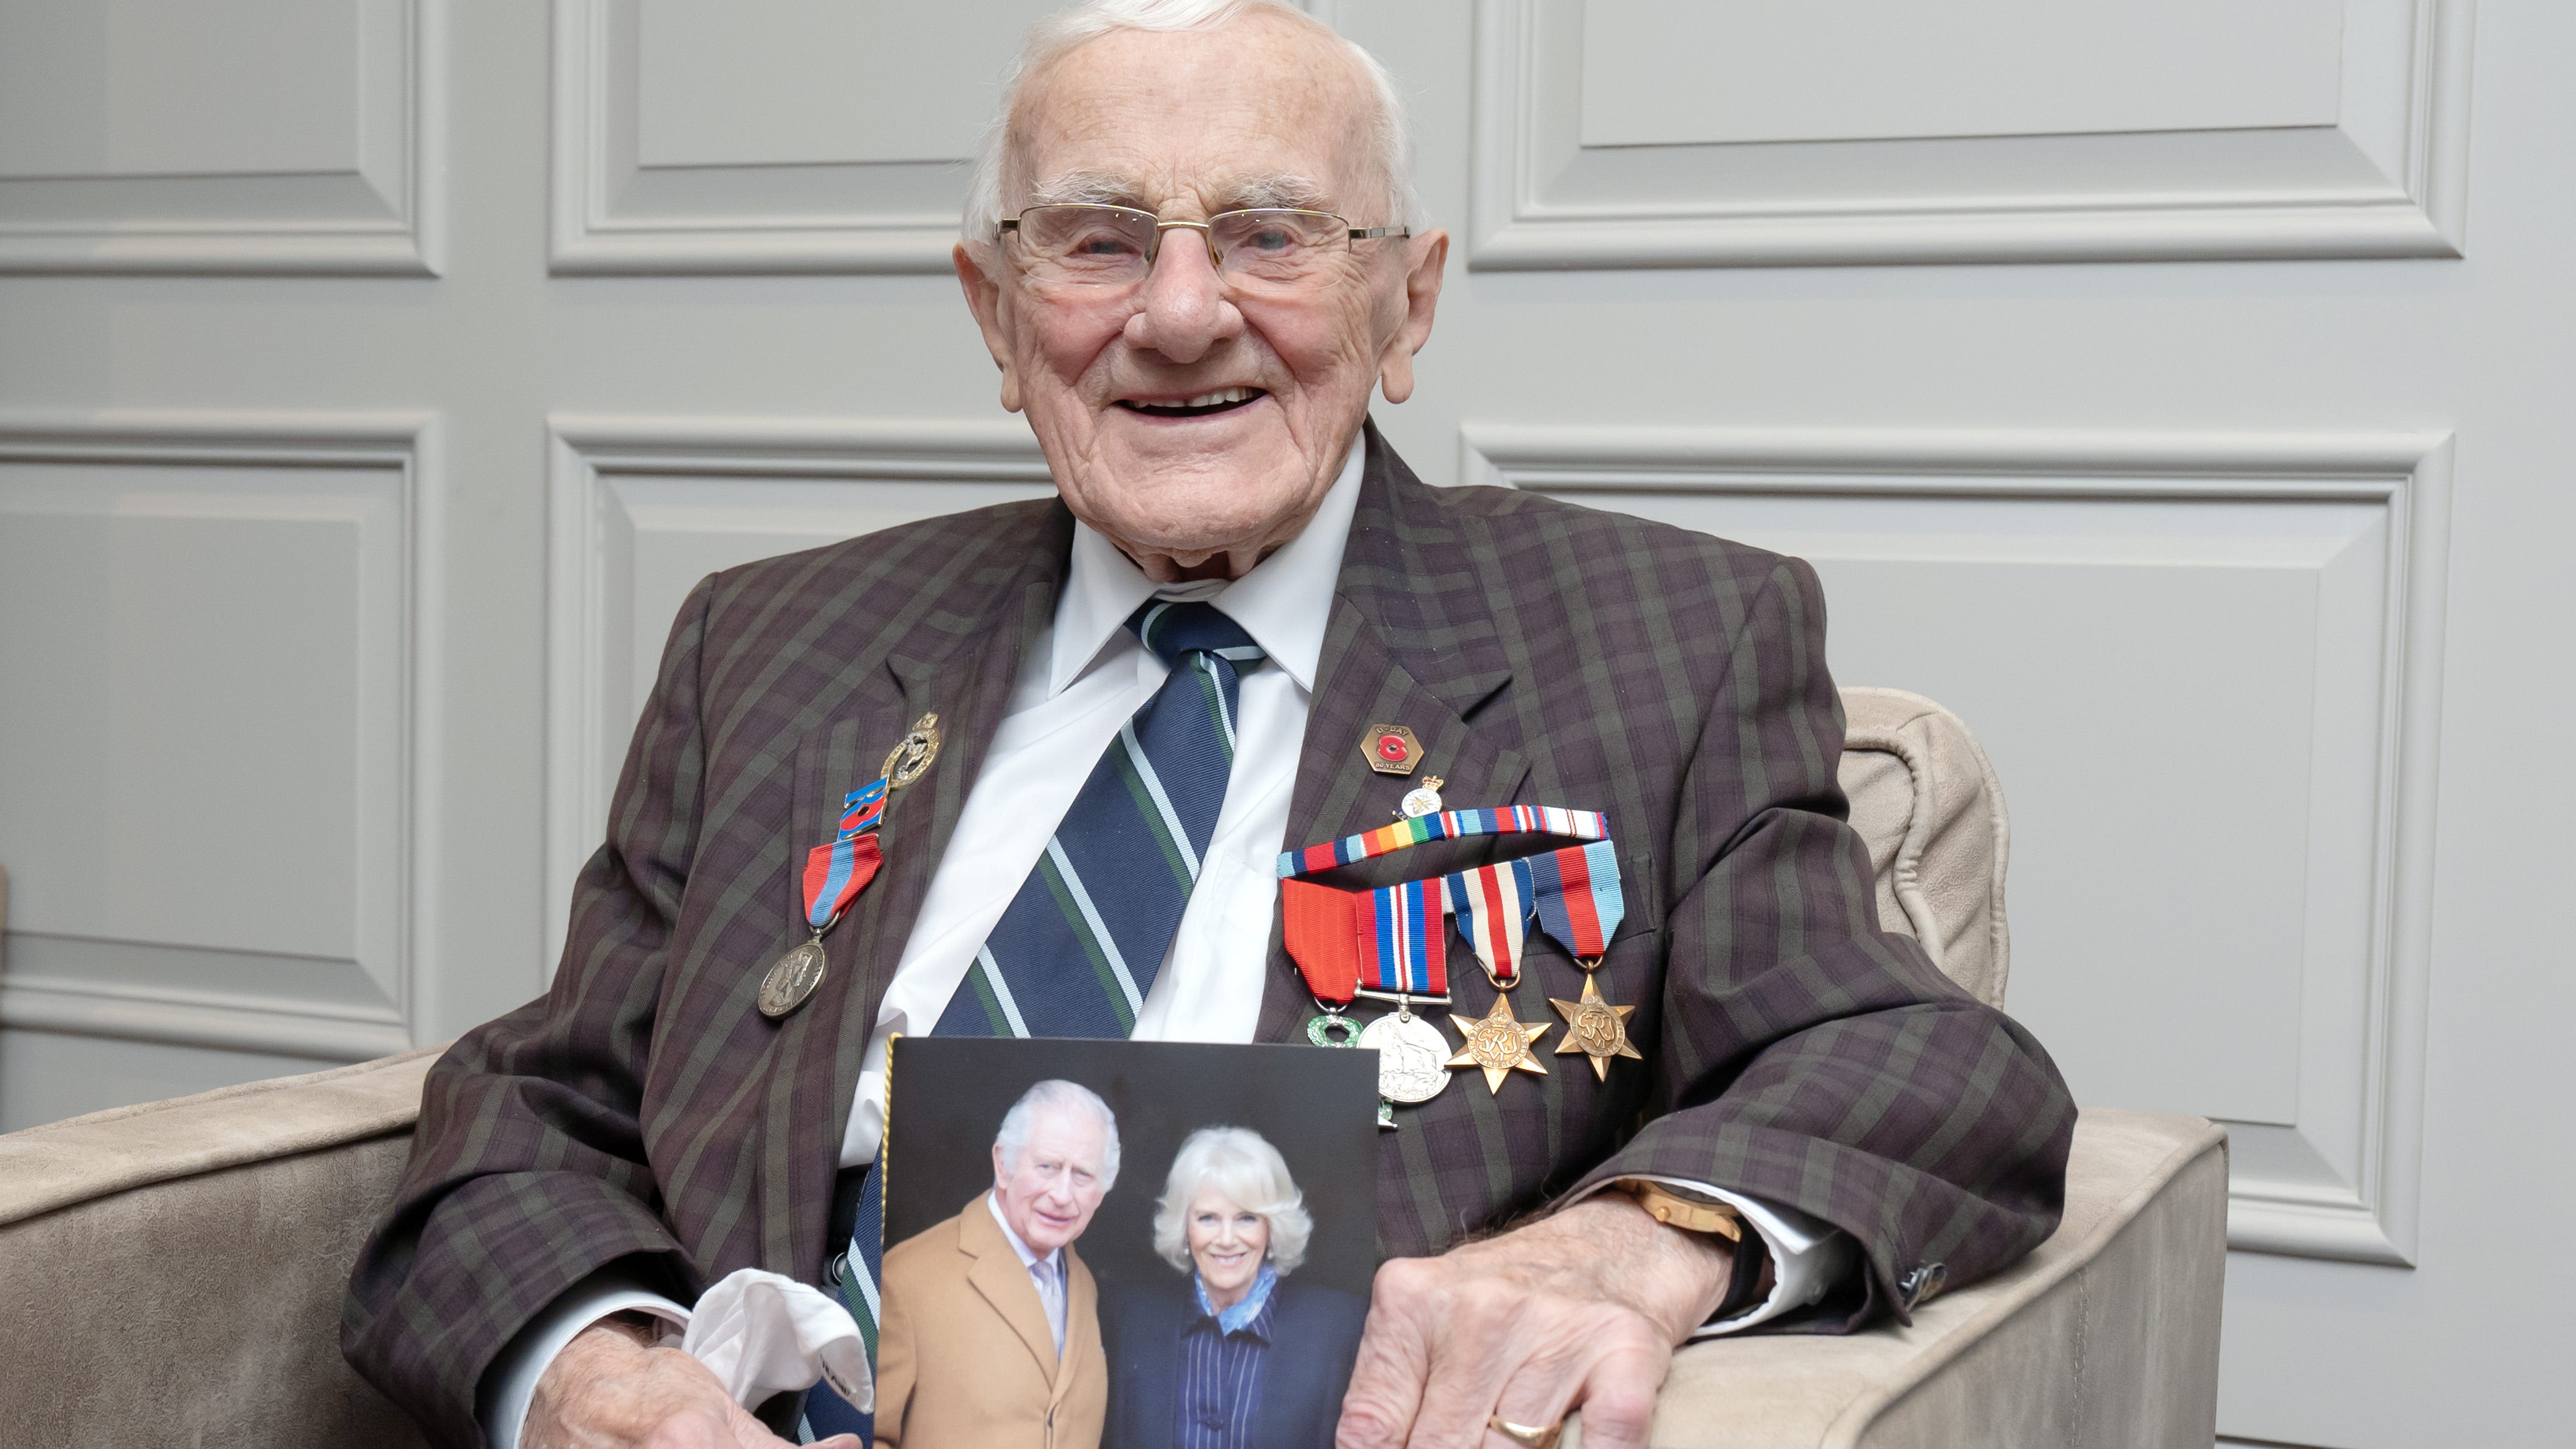 D-Day veteran recalls the horrors of 1944 as he celebrates his 100th birthday